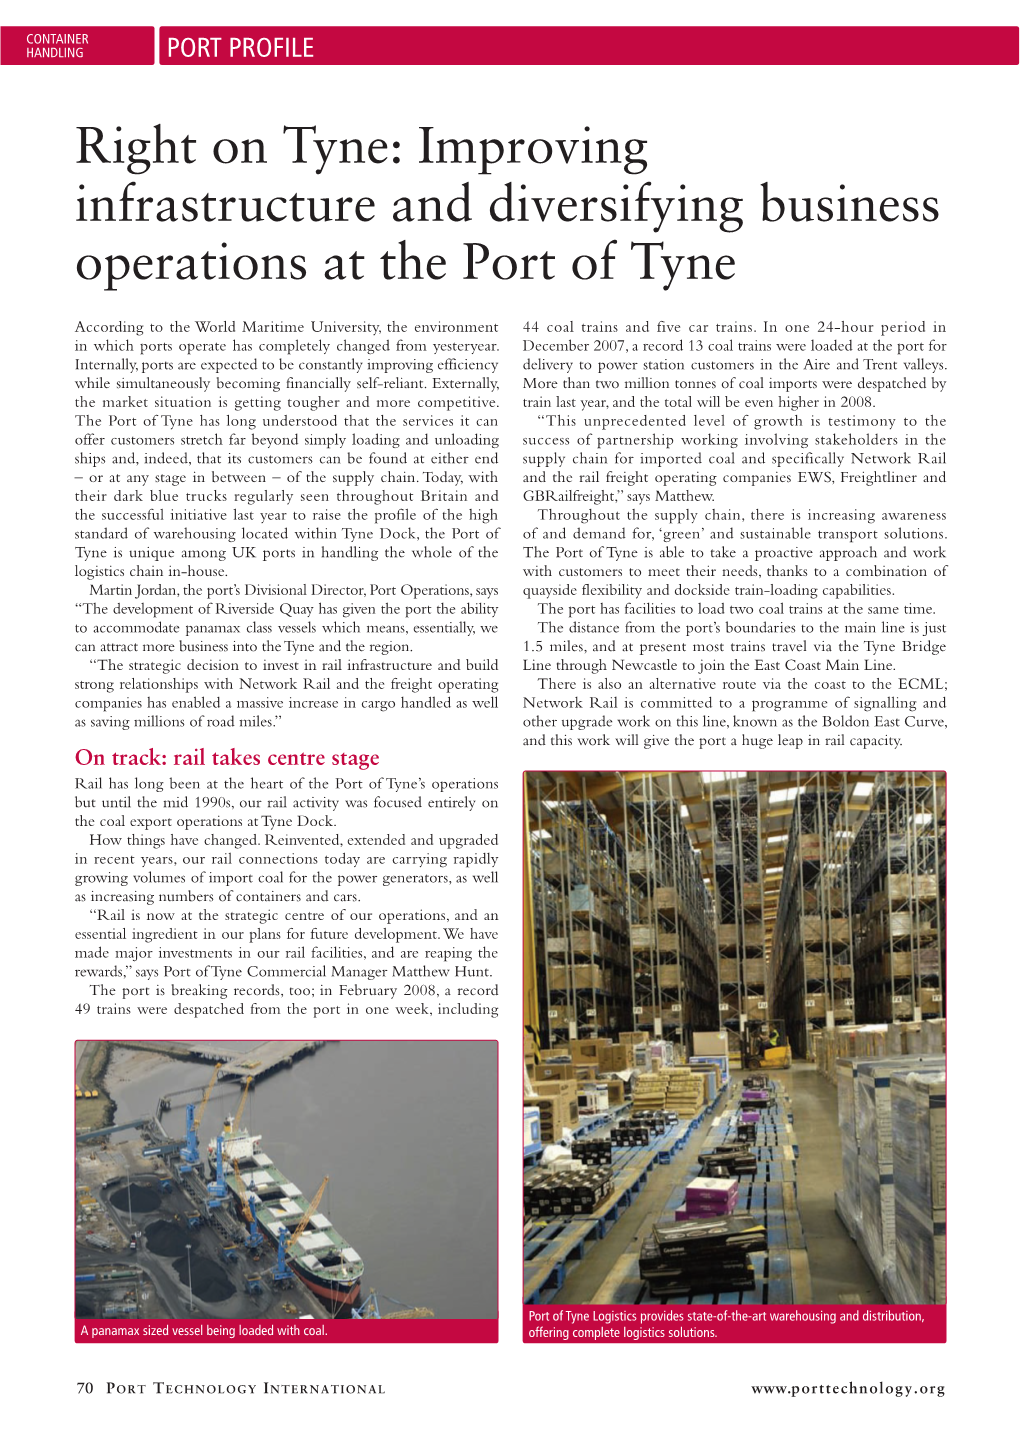 Improving Infrastructure and Diversifying Business Operations at the Port of Tyne